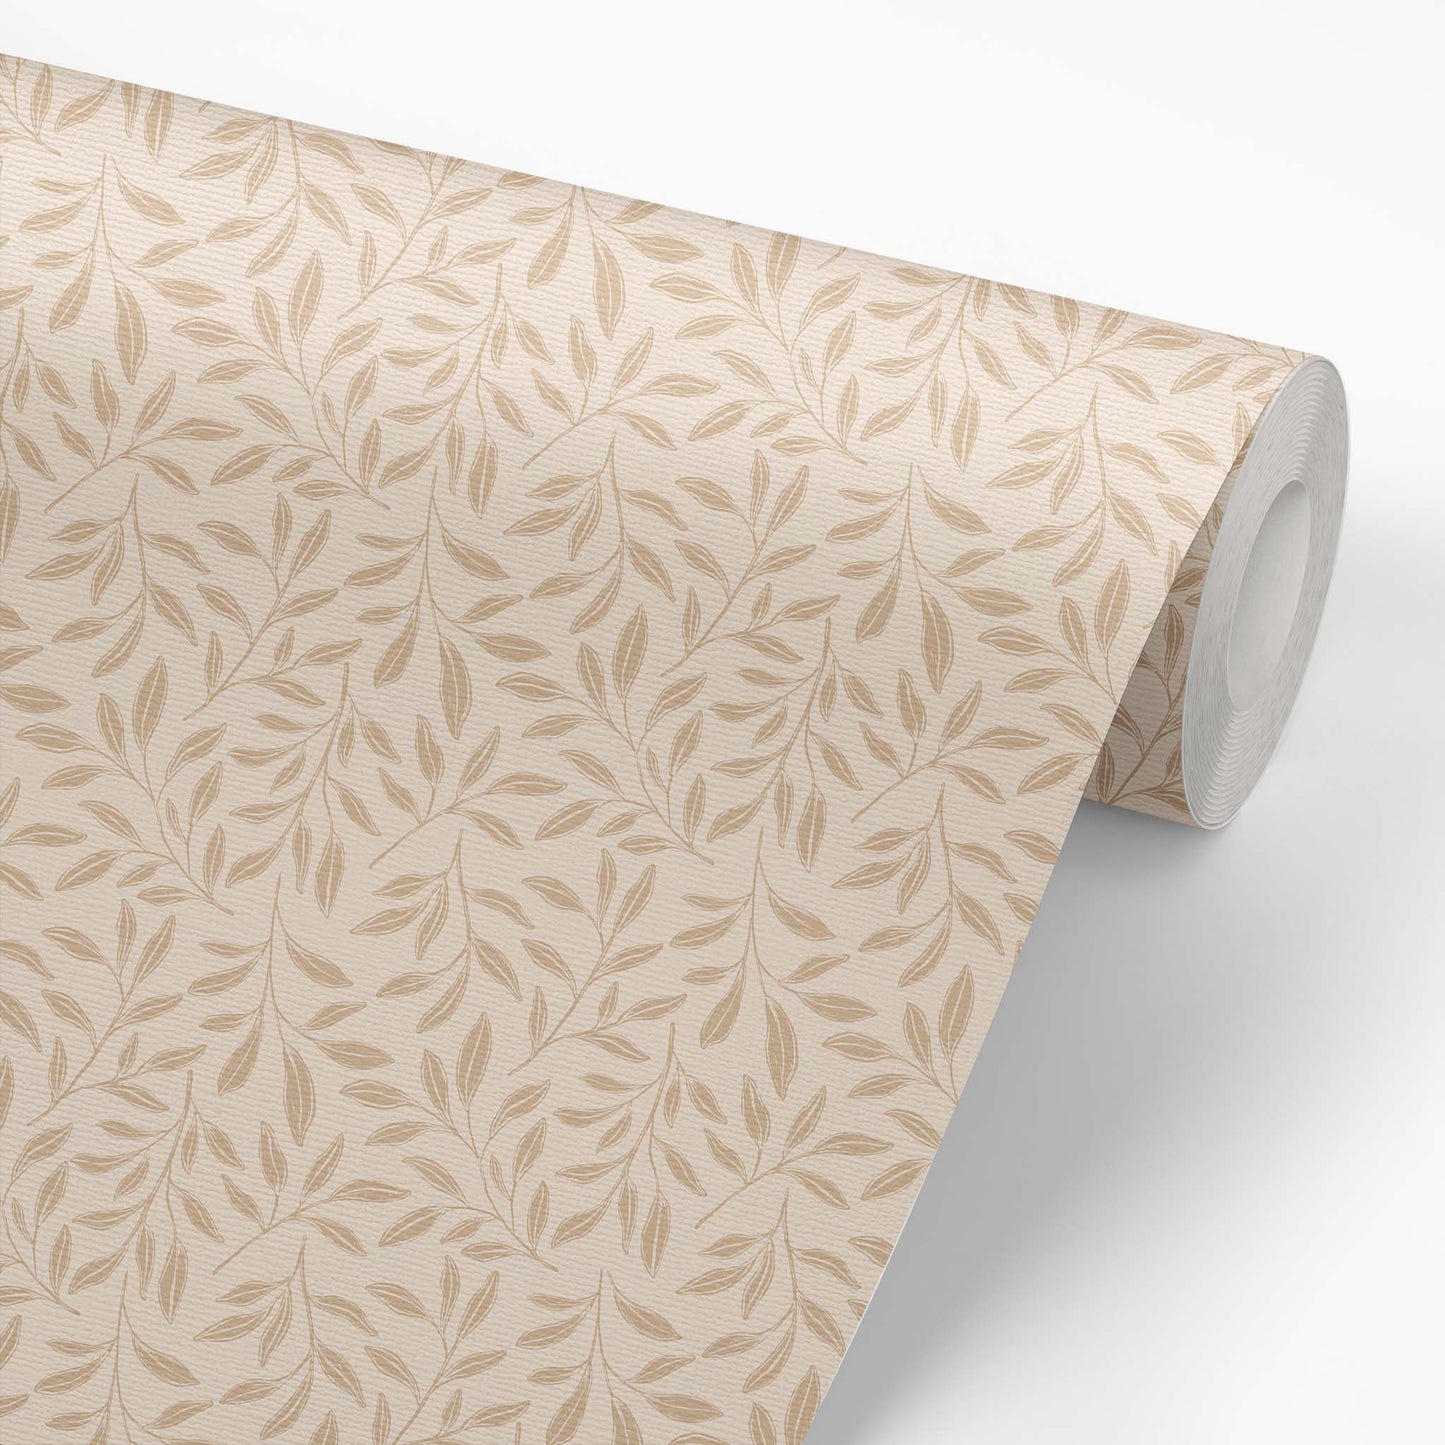 Wallpaper panel featuring Cayla Naylor Willow-Dogwood Peel and Stick Wallpaper - a classic pattern